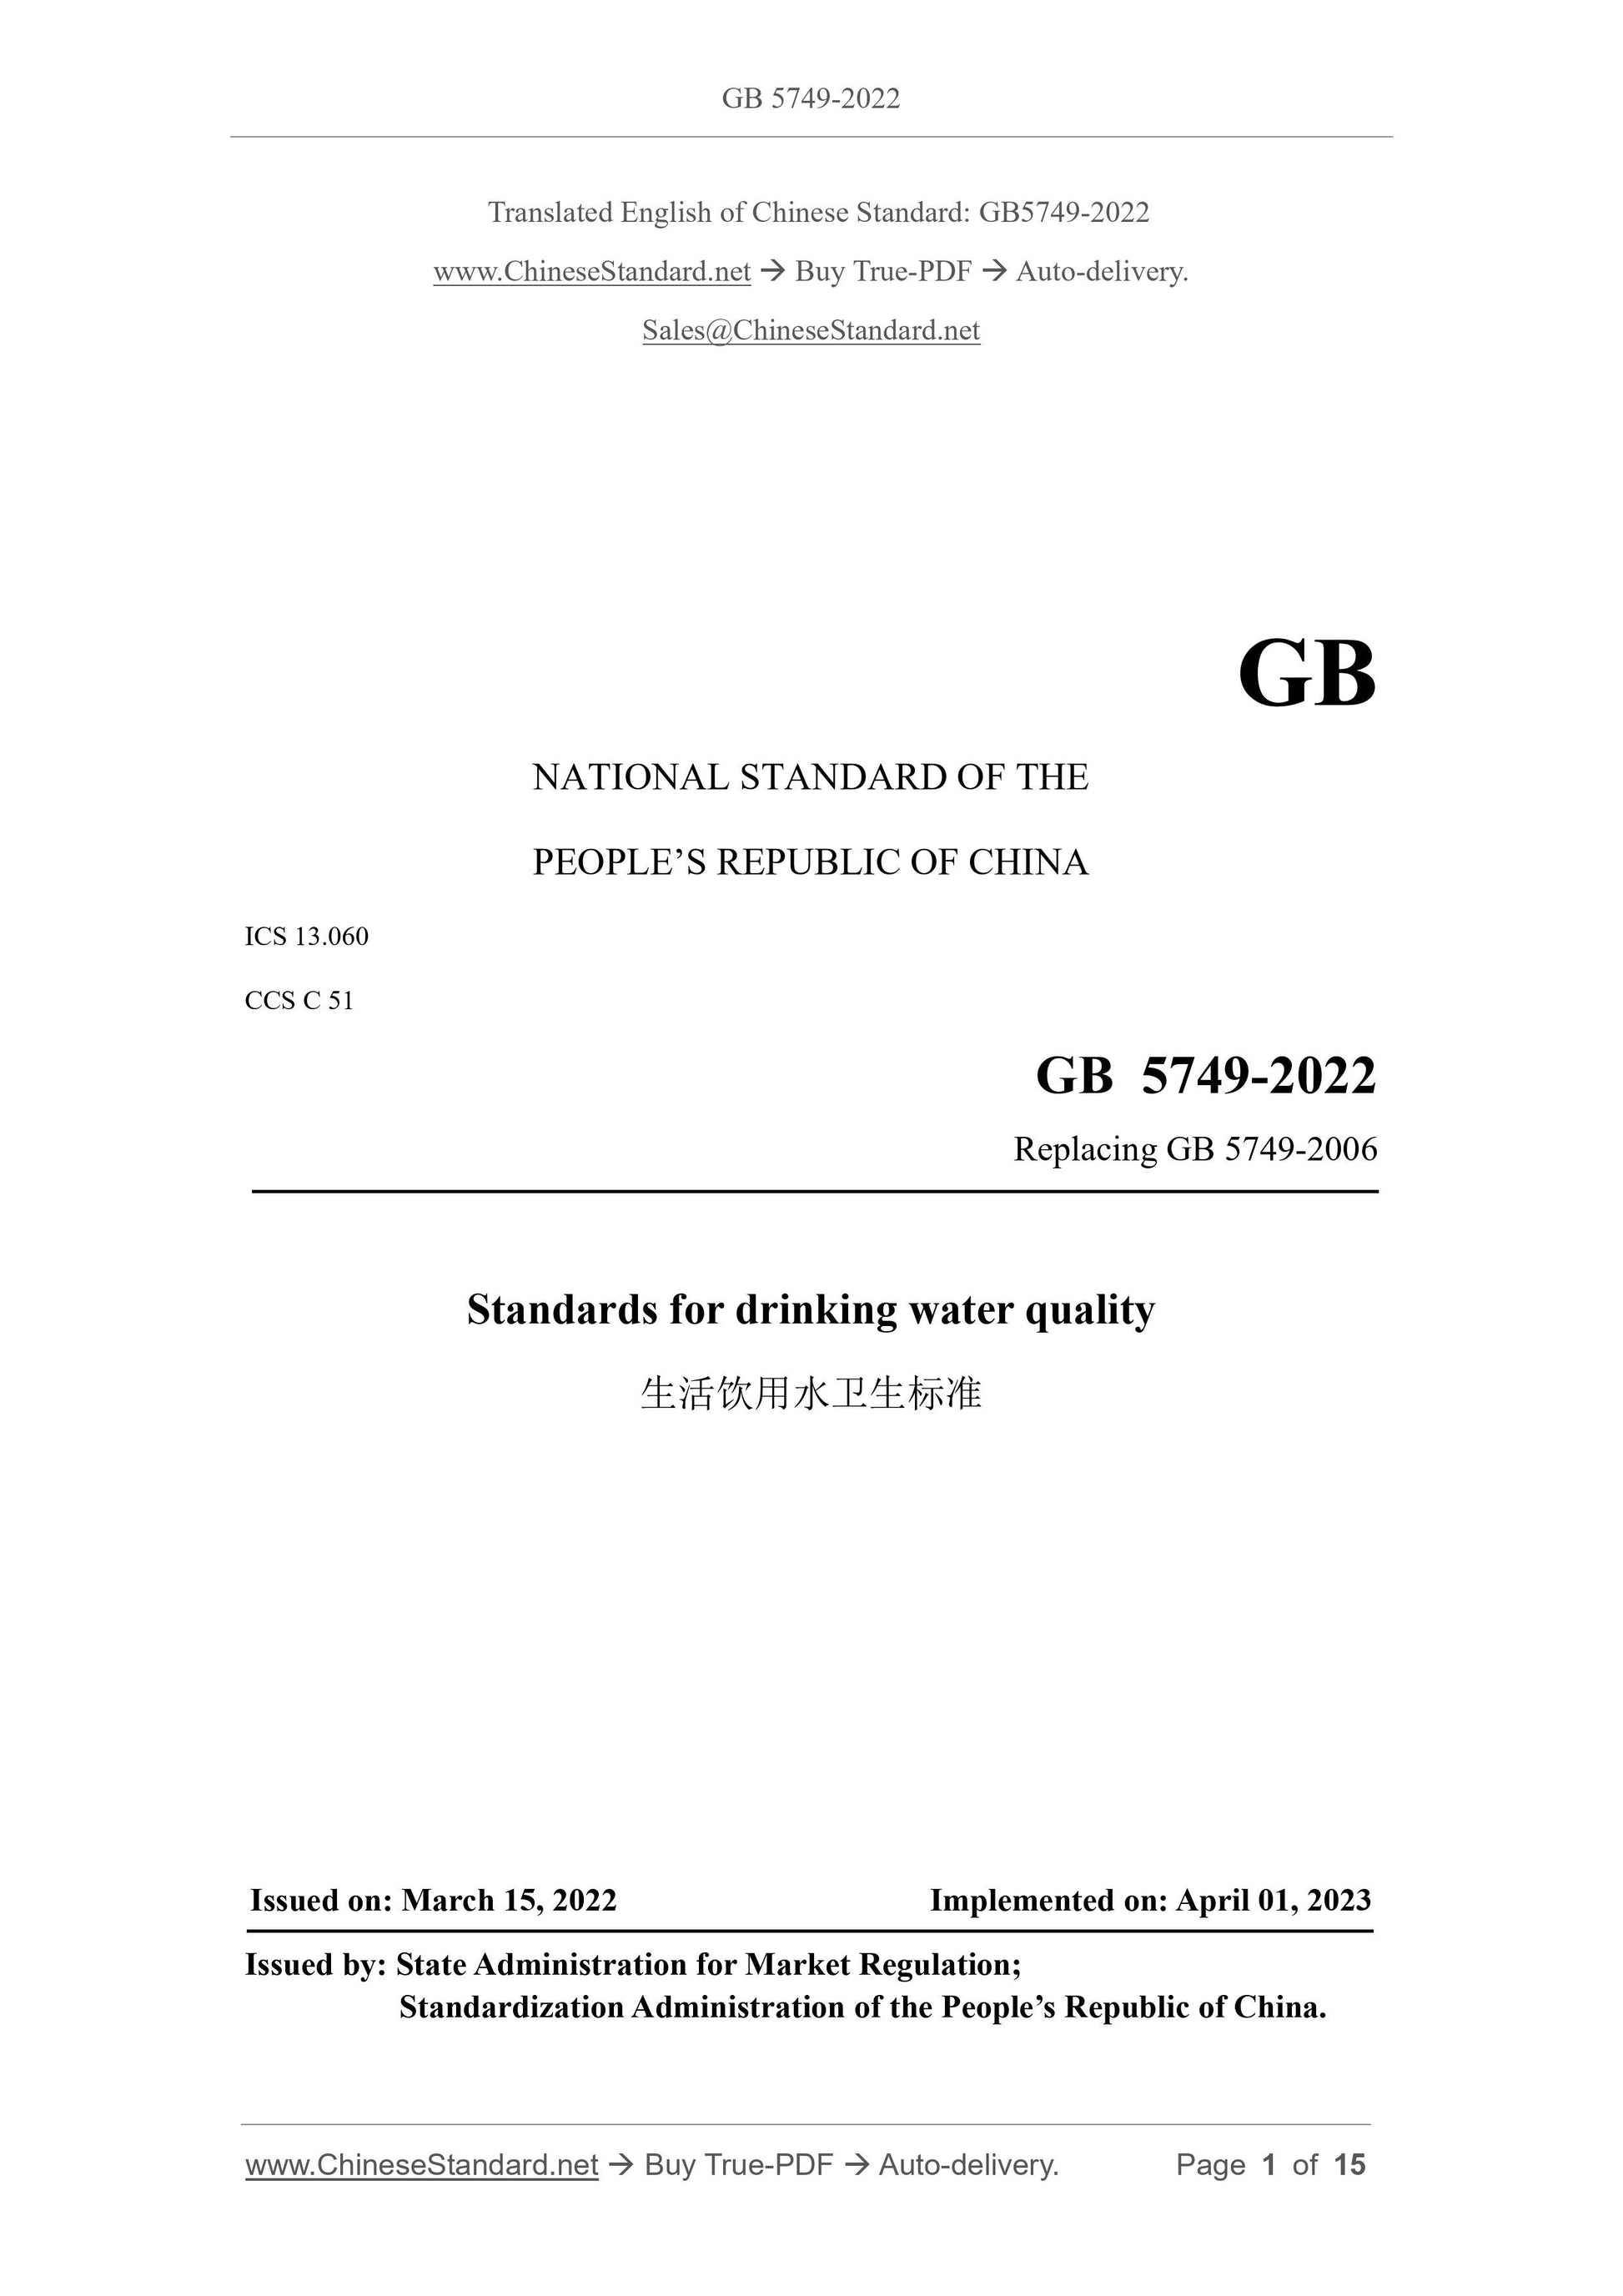 GB 5749-2022 Page 1